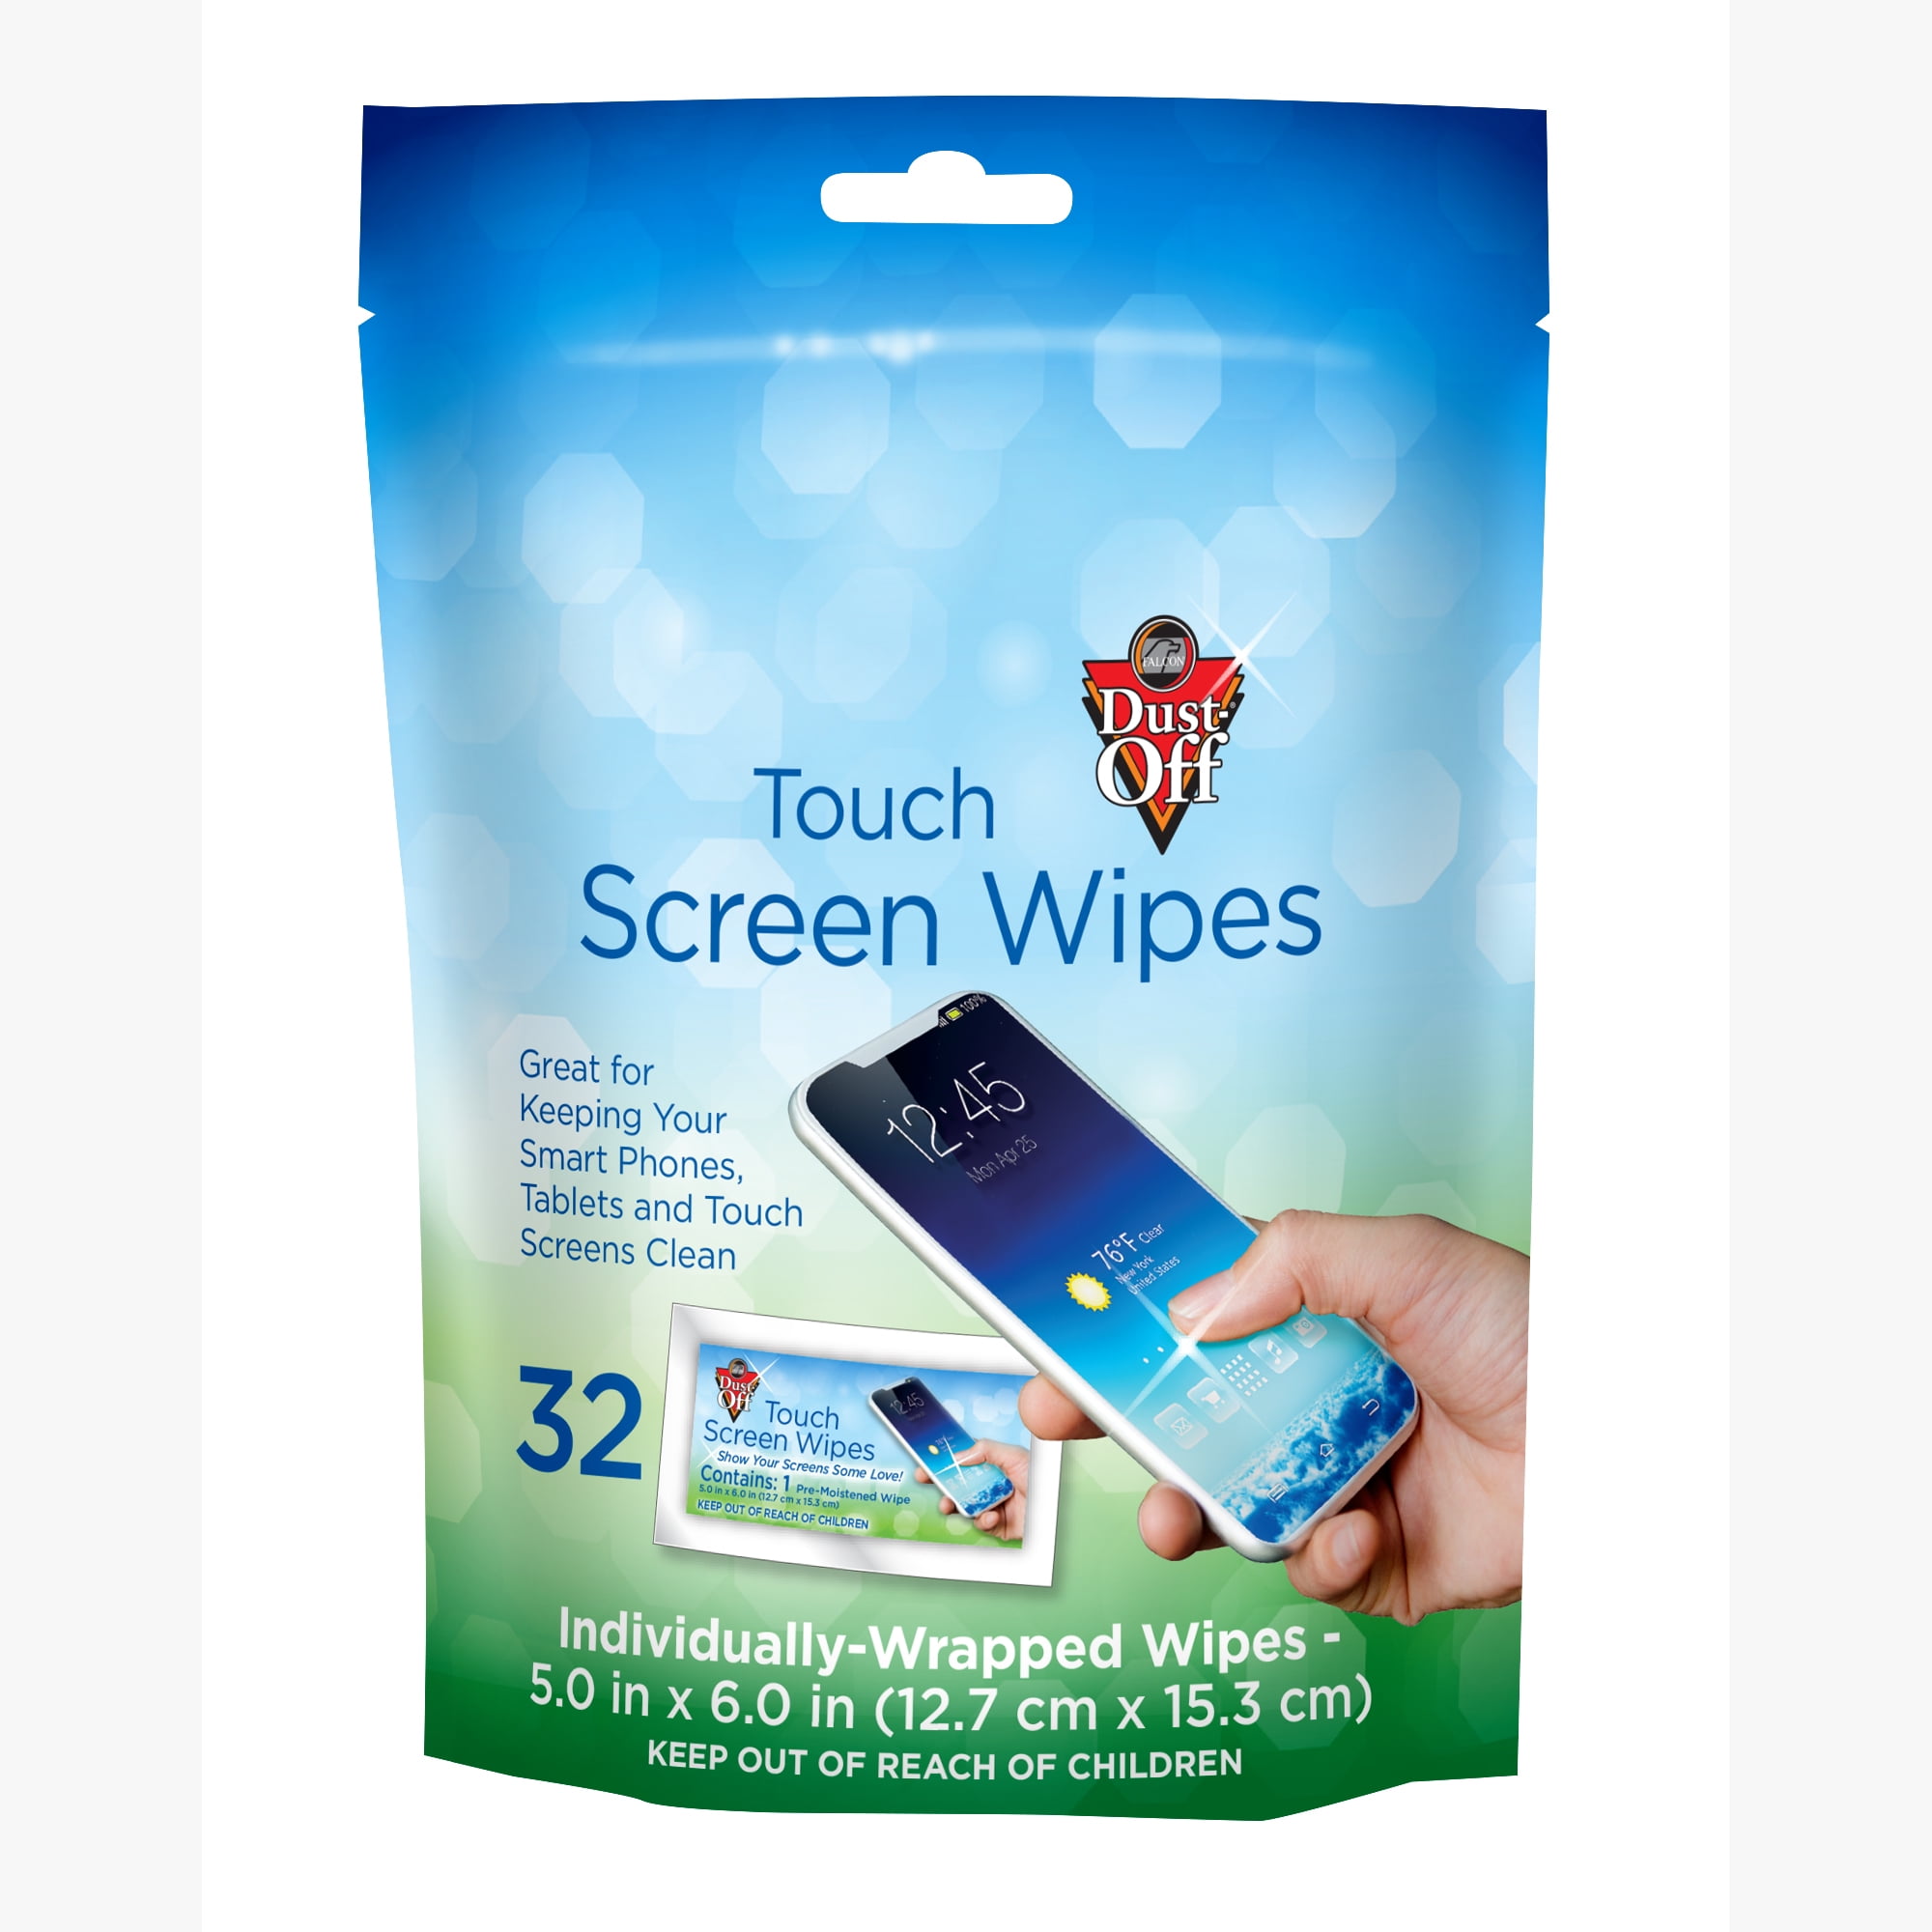 Dust wipes Stock Photos, Royalty Free Dust wipes Images